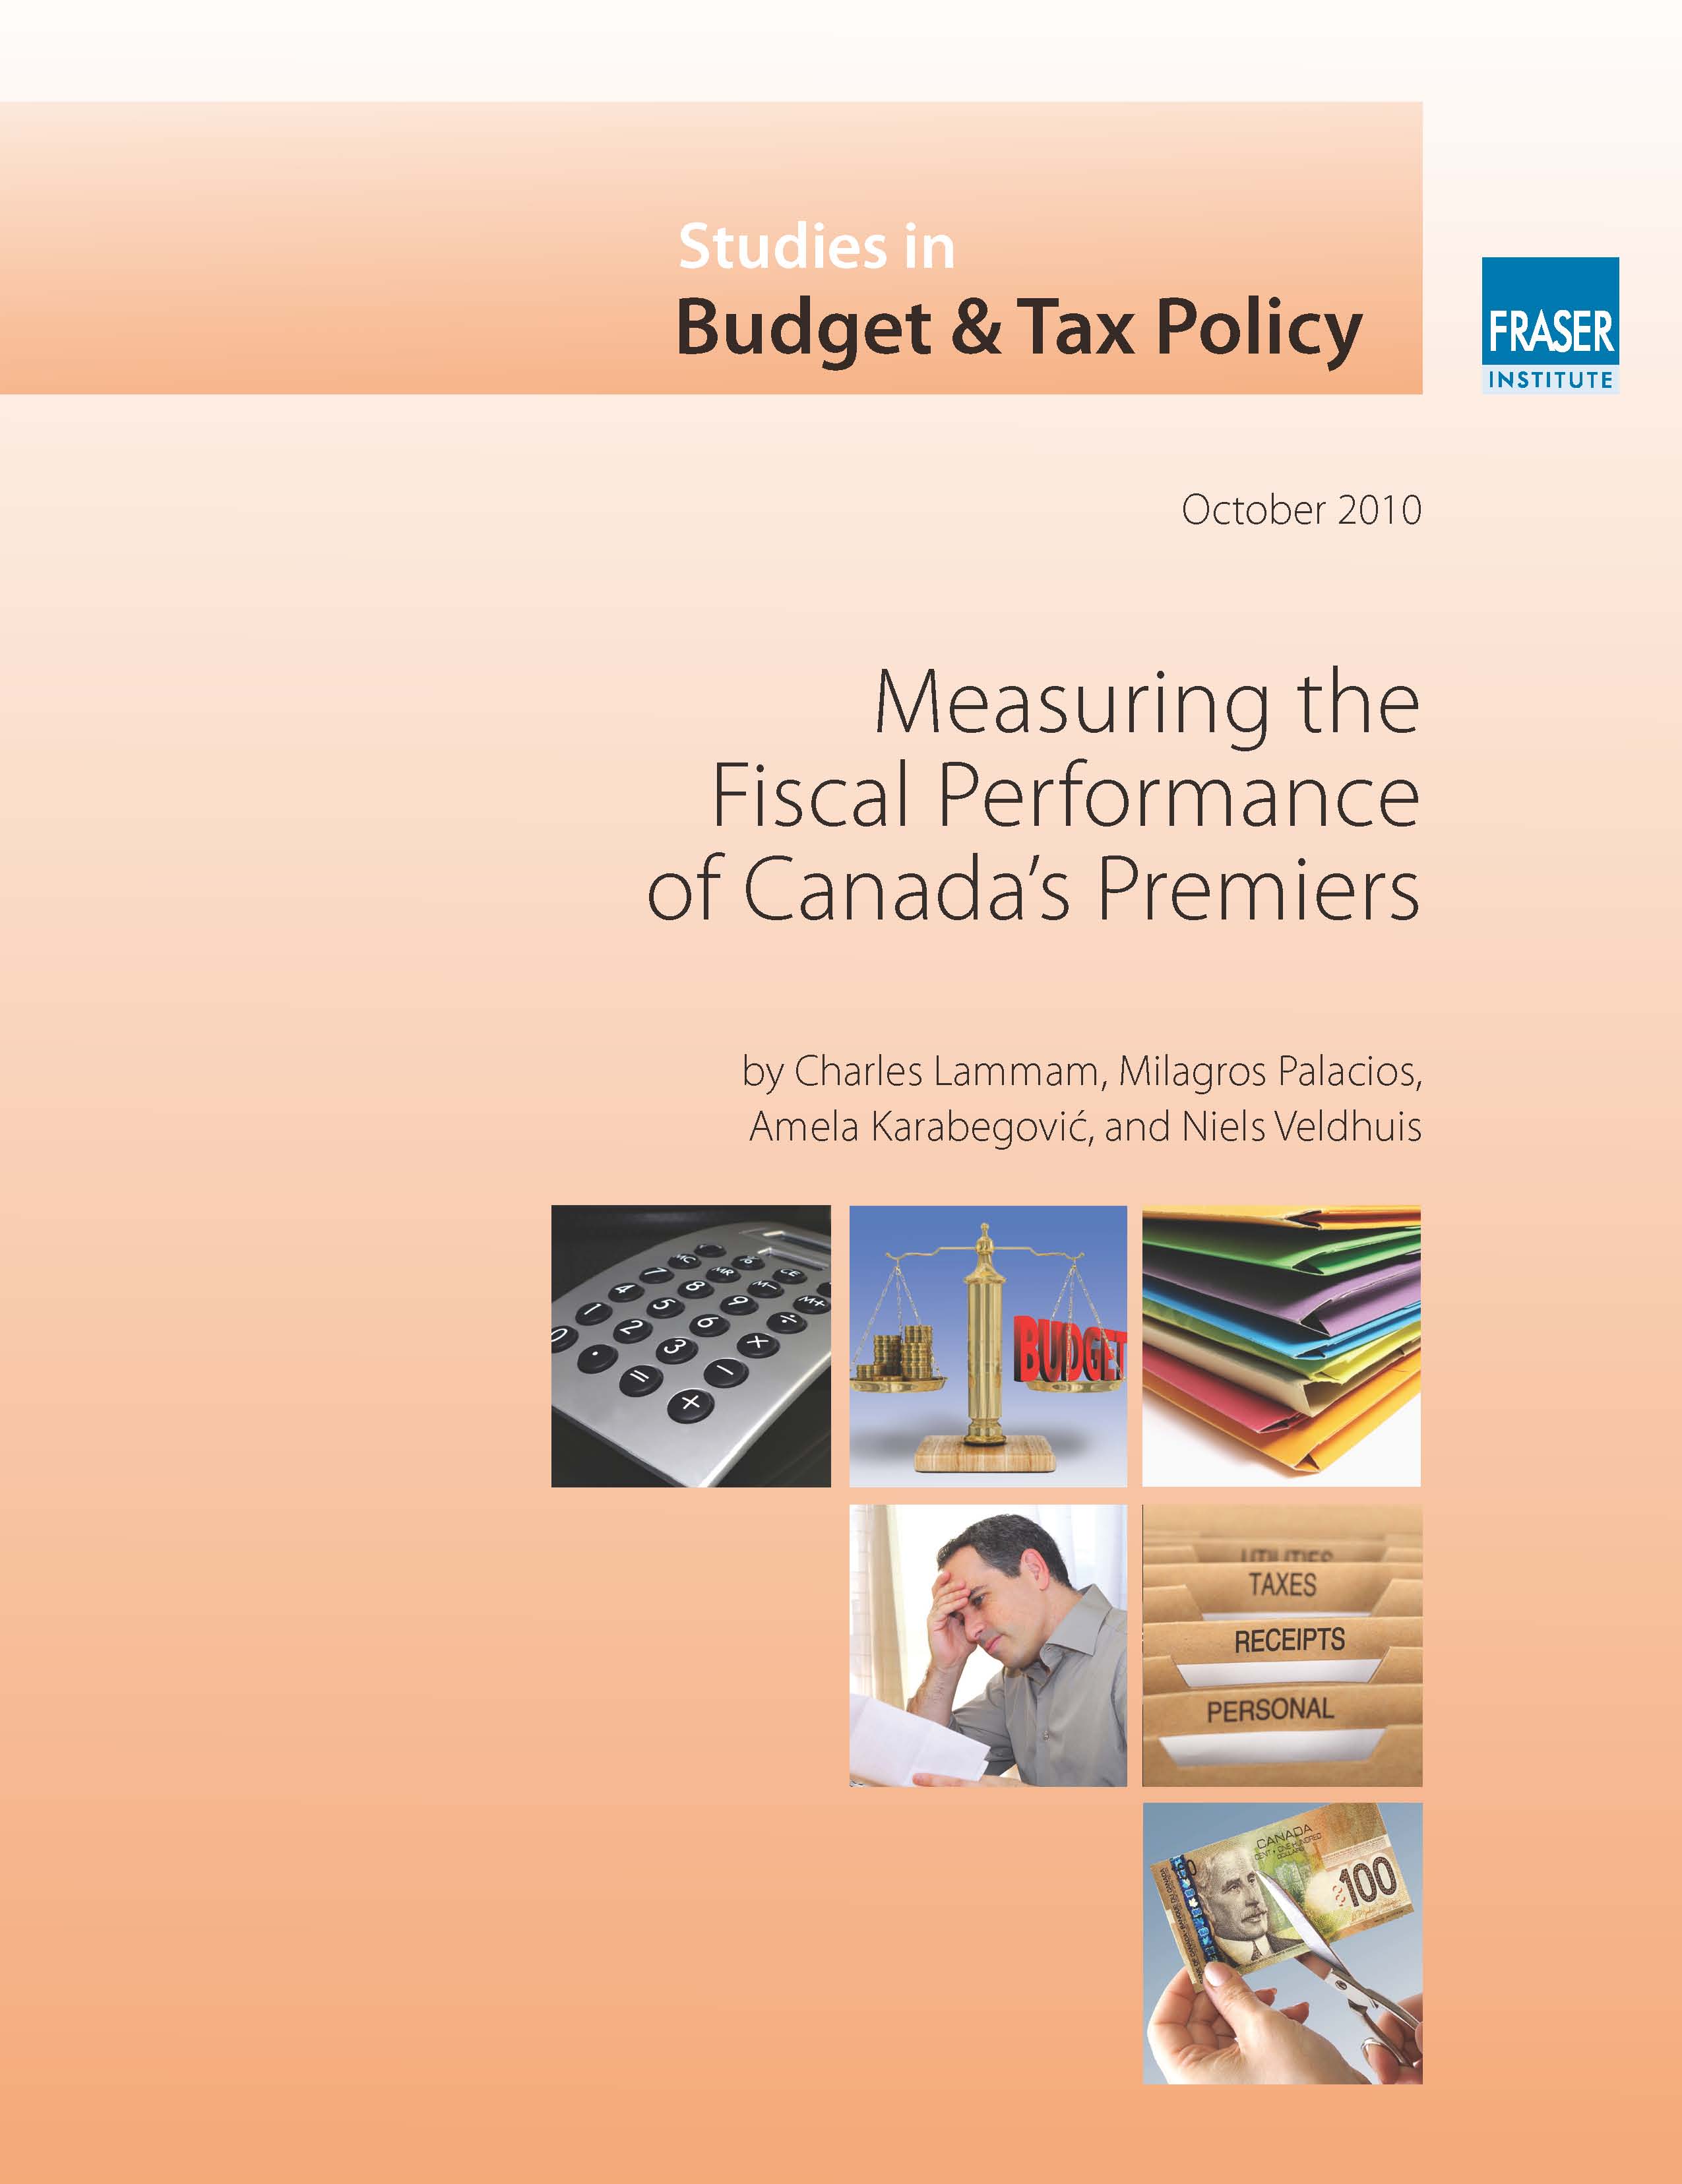 Measuring the Fiscal Performance of Canada's Premiers